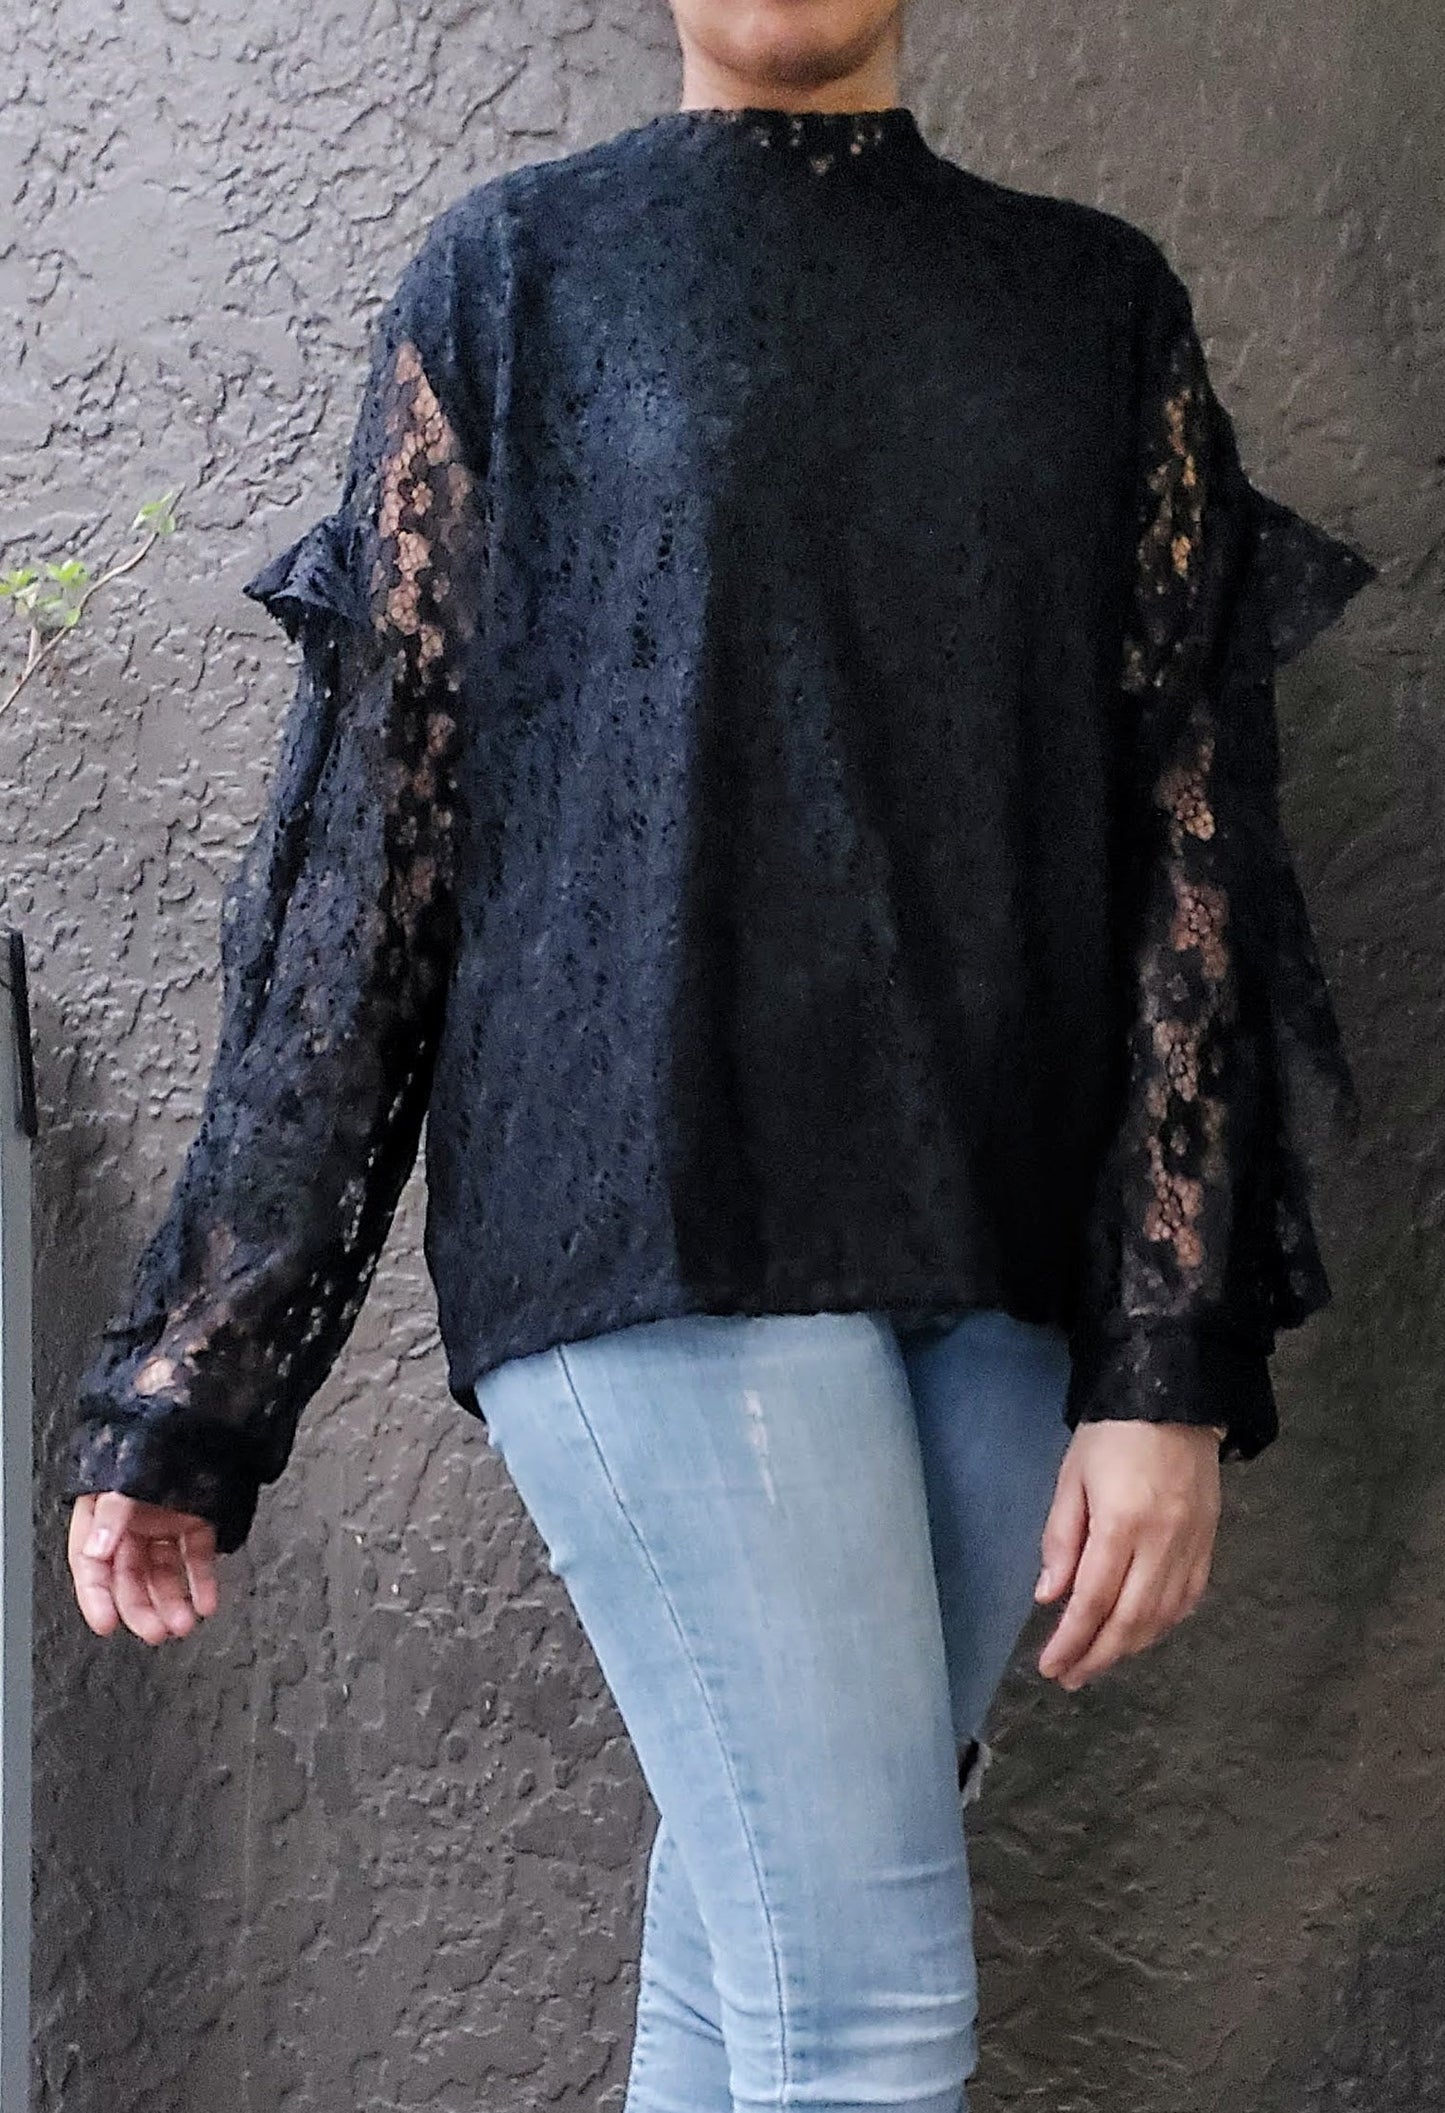 Ladie's Lace Blouse/ Long Sleeves